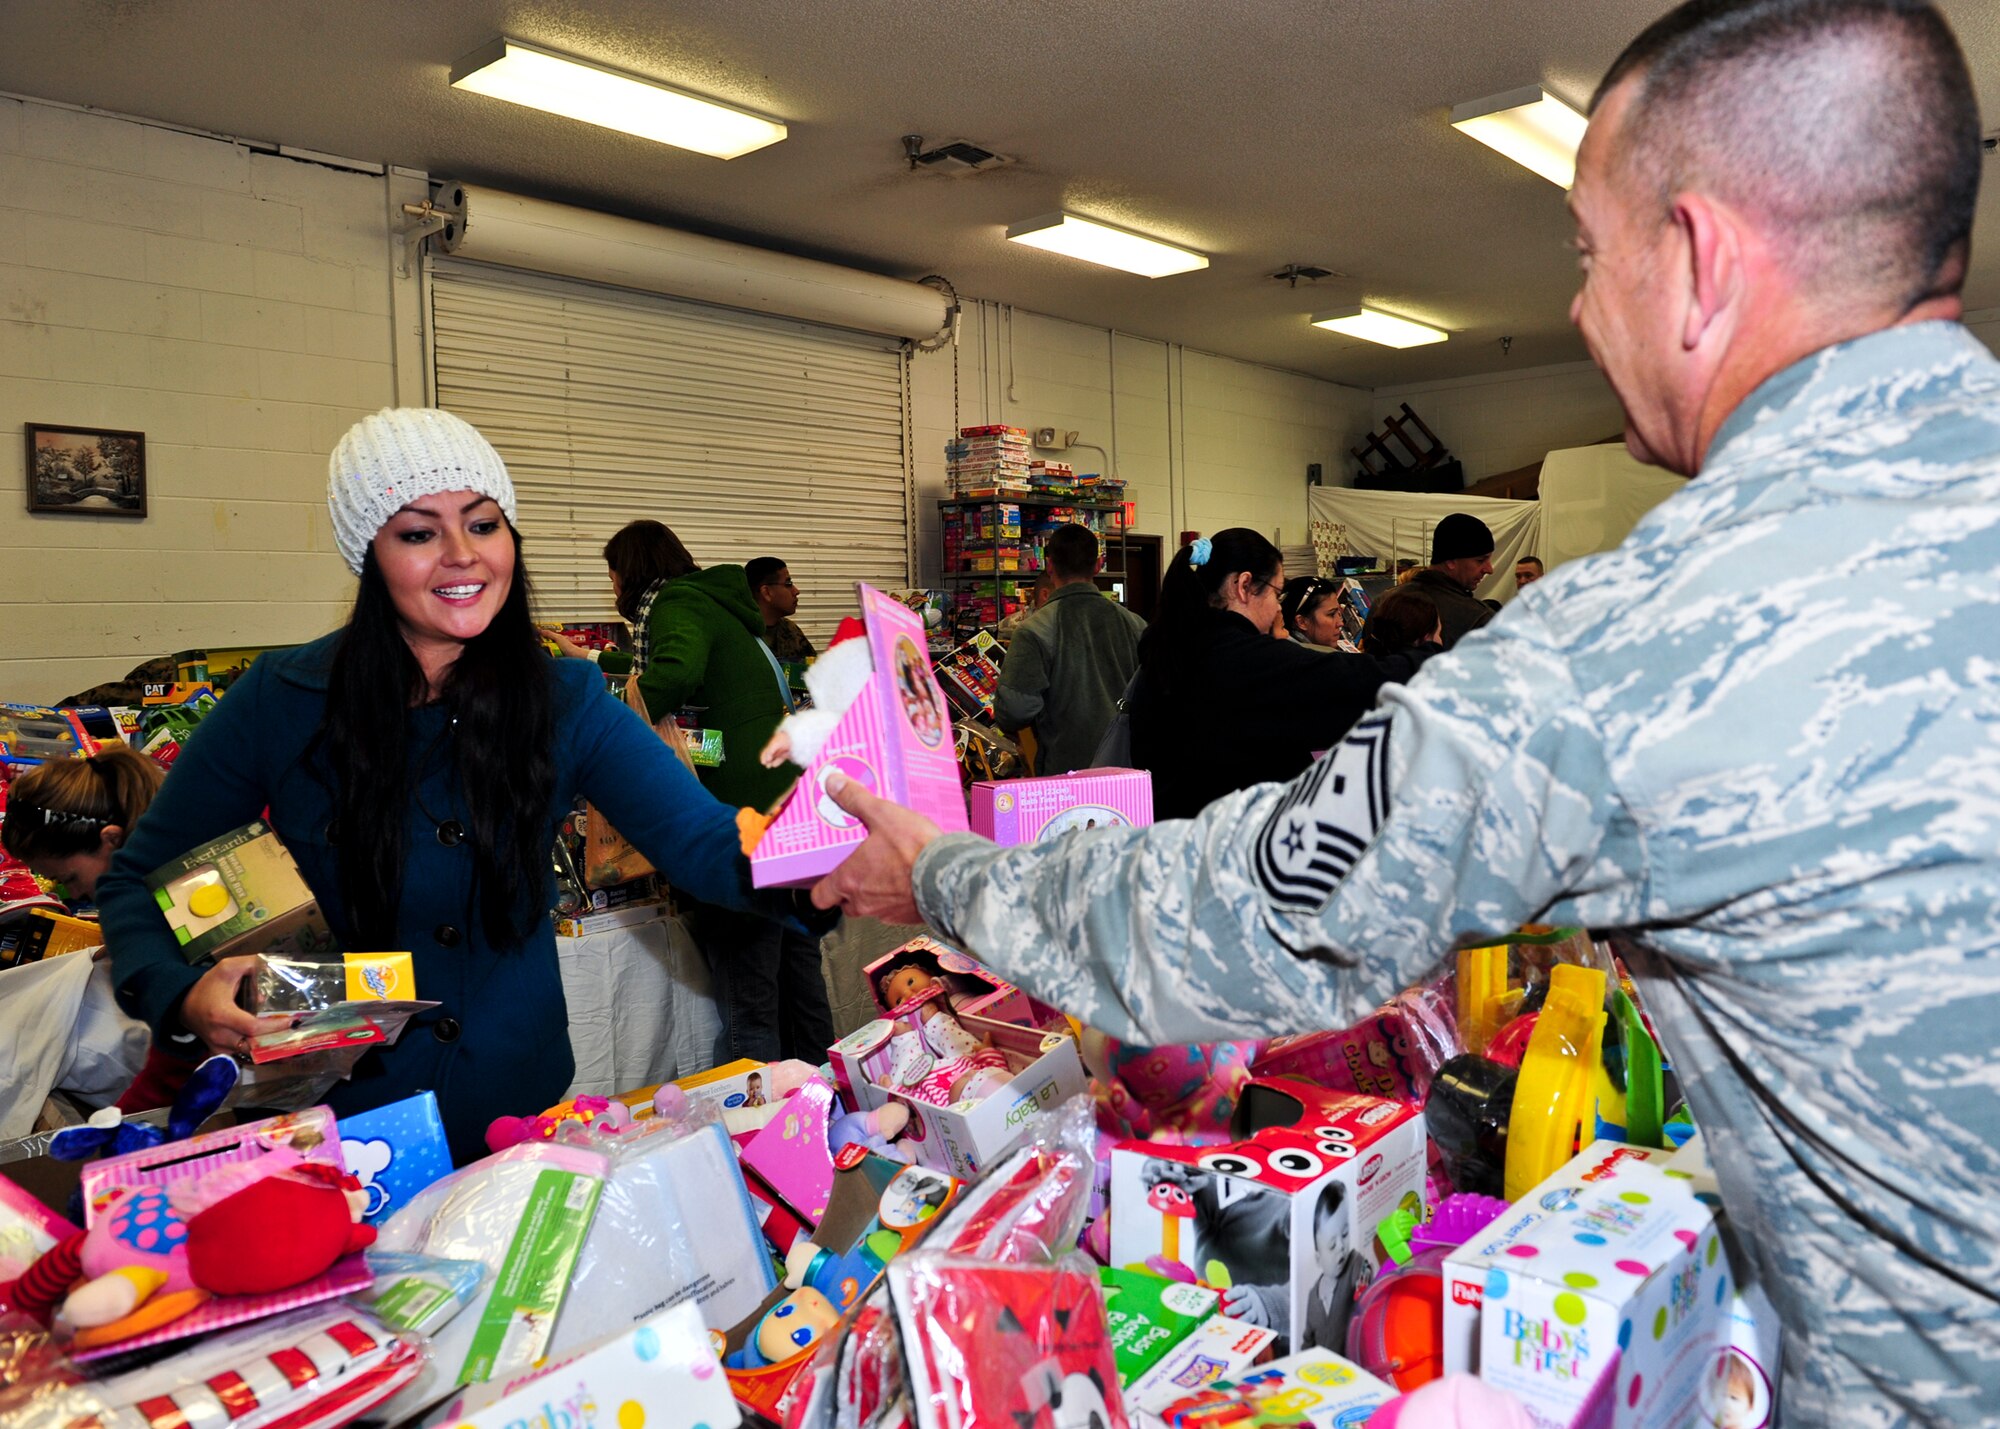 Erika Pinola receives help picking out a toy for her three children from a volunteer at the 8th annual toy distribution Nov. 30 at the Airman’s Attic. Members of all services up to the grade of E-5, lined up to find the perfect gift for their children. More than 4,000 toys were donated for the event, helping more than 200 families in the Eglin community. (U.S. Air Force photo/Sachel Seabrook)